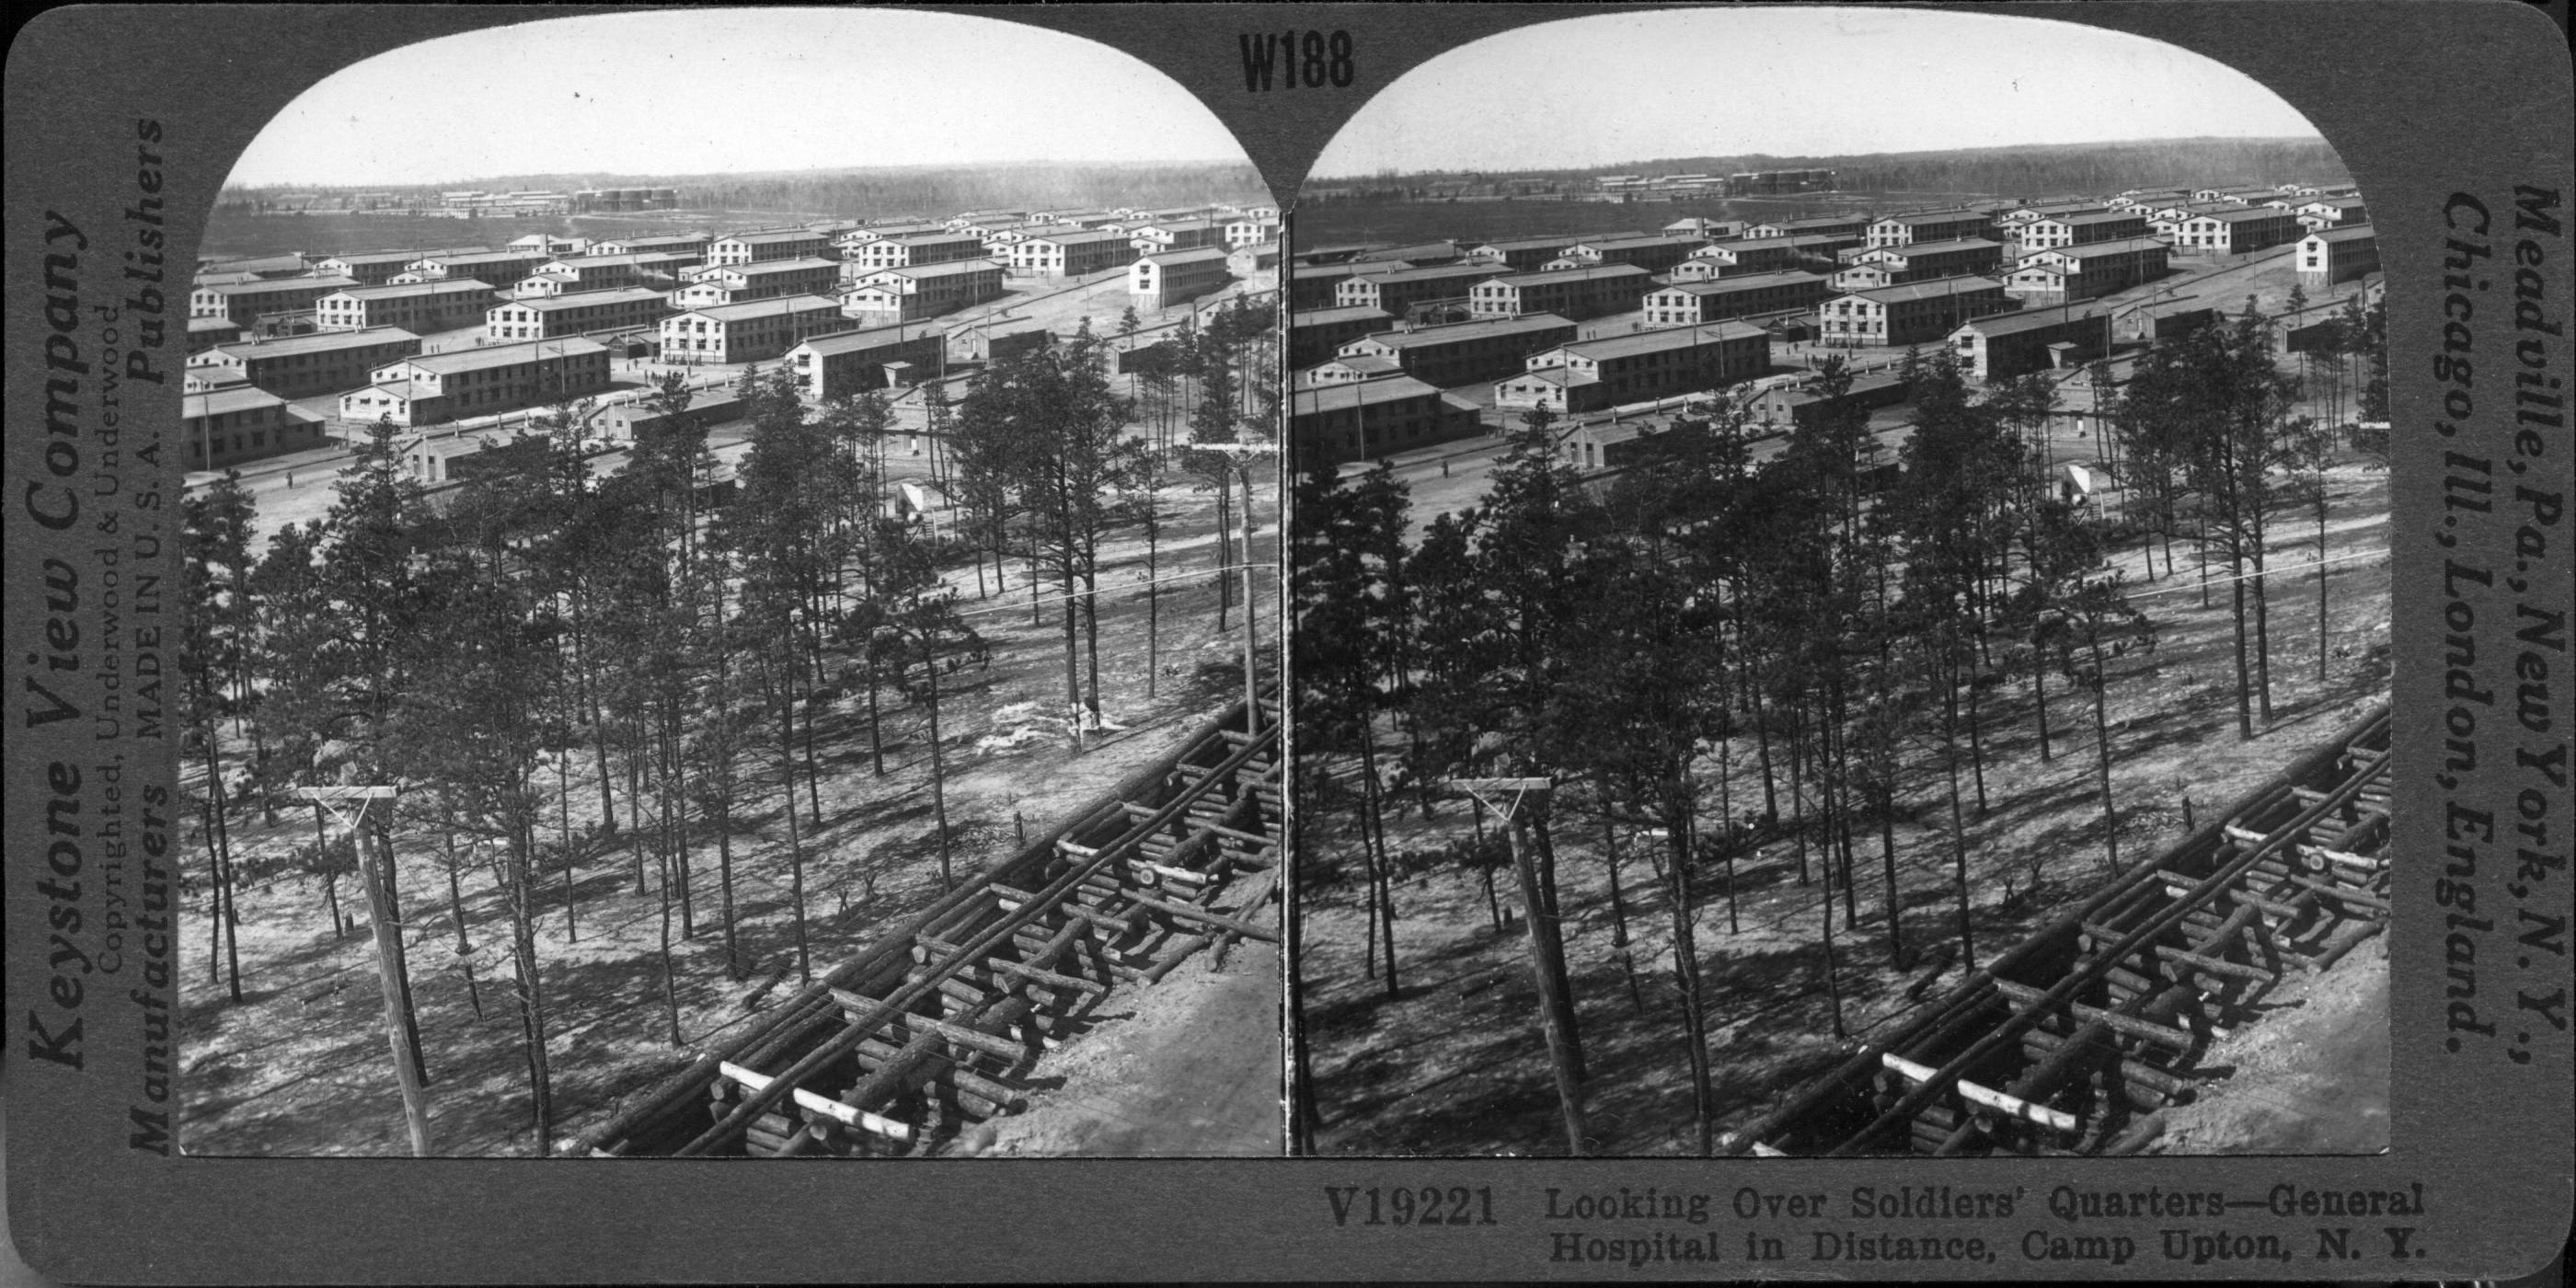 Looking Over Soldier's Quarters--General Hospital in Distance. Camp Upton, N.Y.